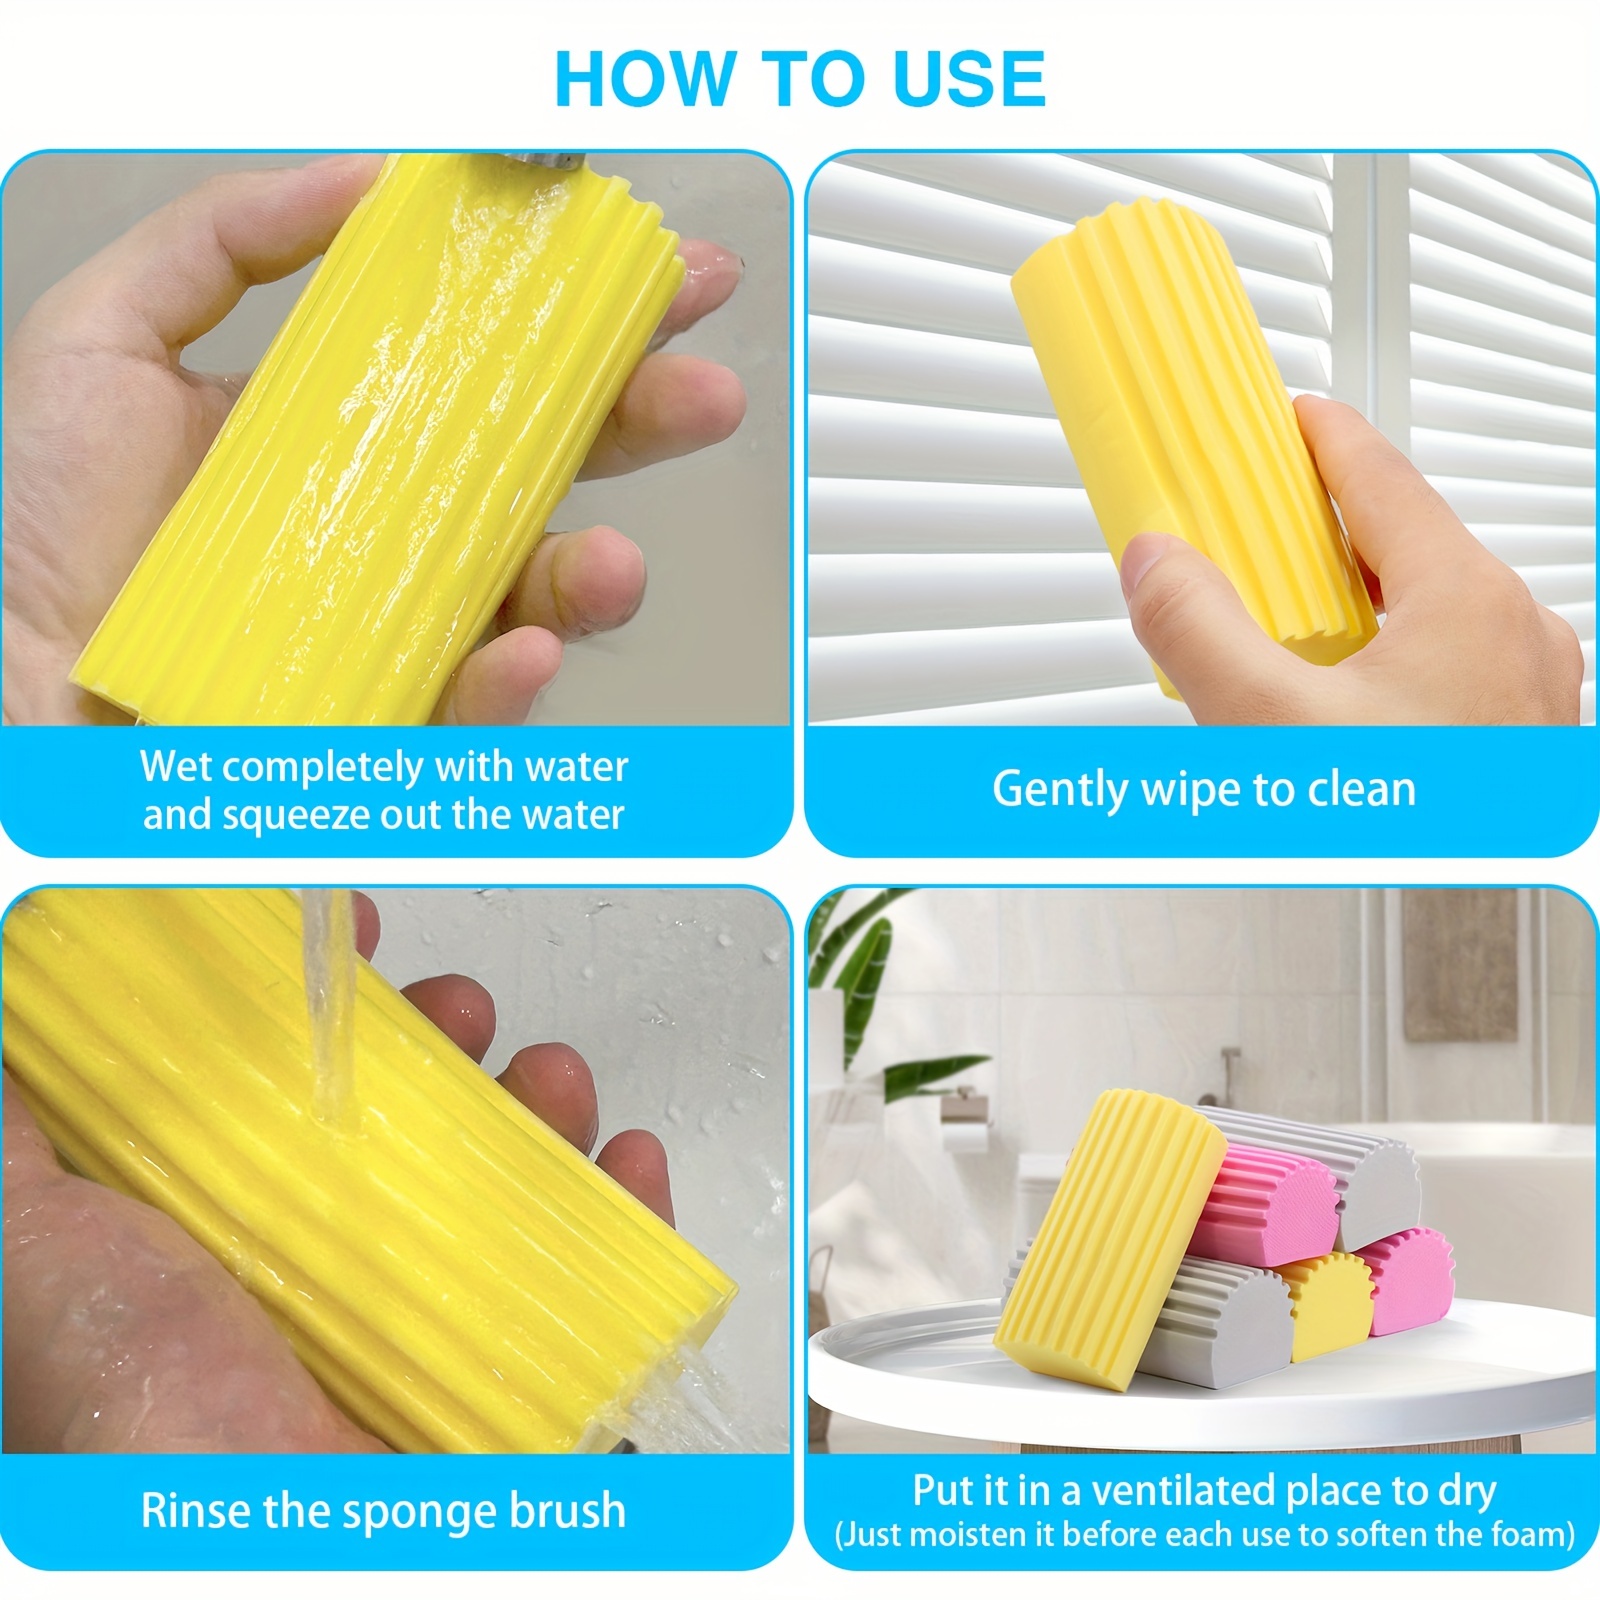 6-Pack Damp Clean Duster Sponge, Reusable Damp Duster Sponge for Cleaning Dishes, Blinds, Glass, Baseboards, Vents, Window Track Grooves & Faucets